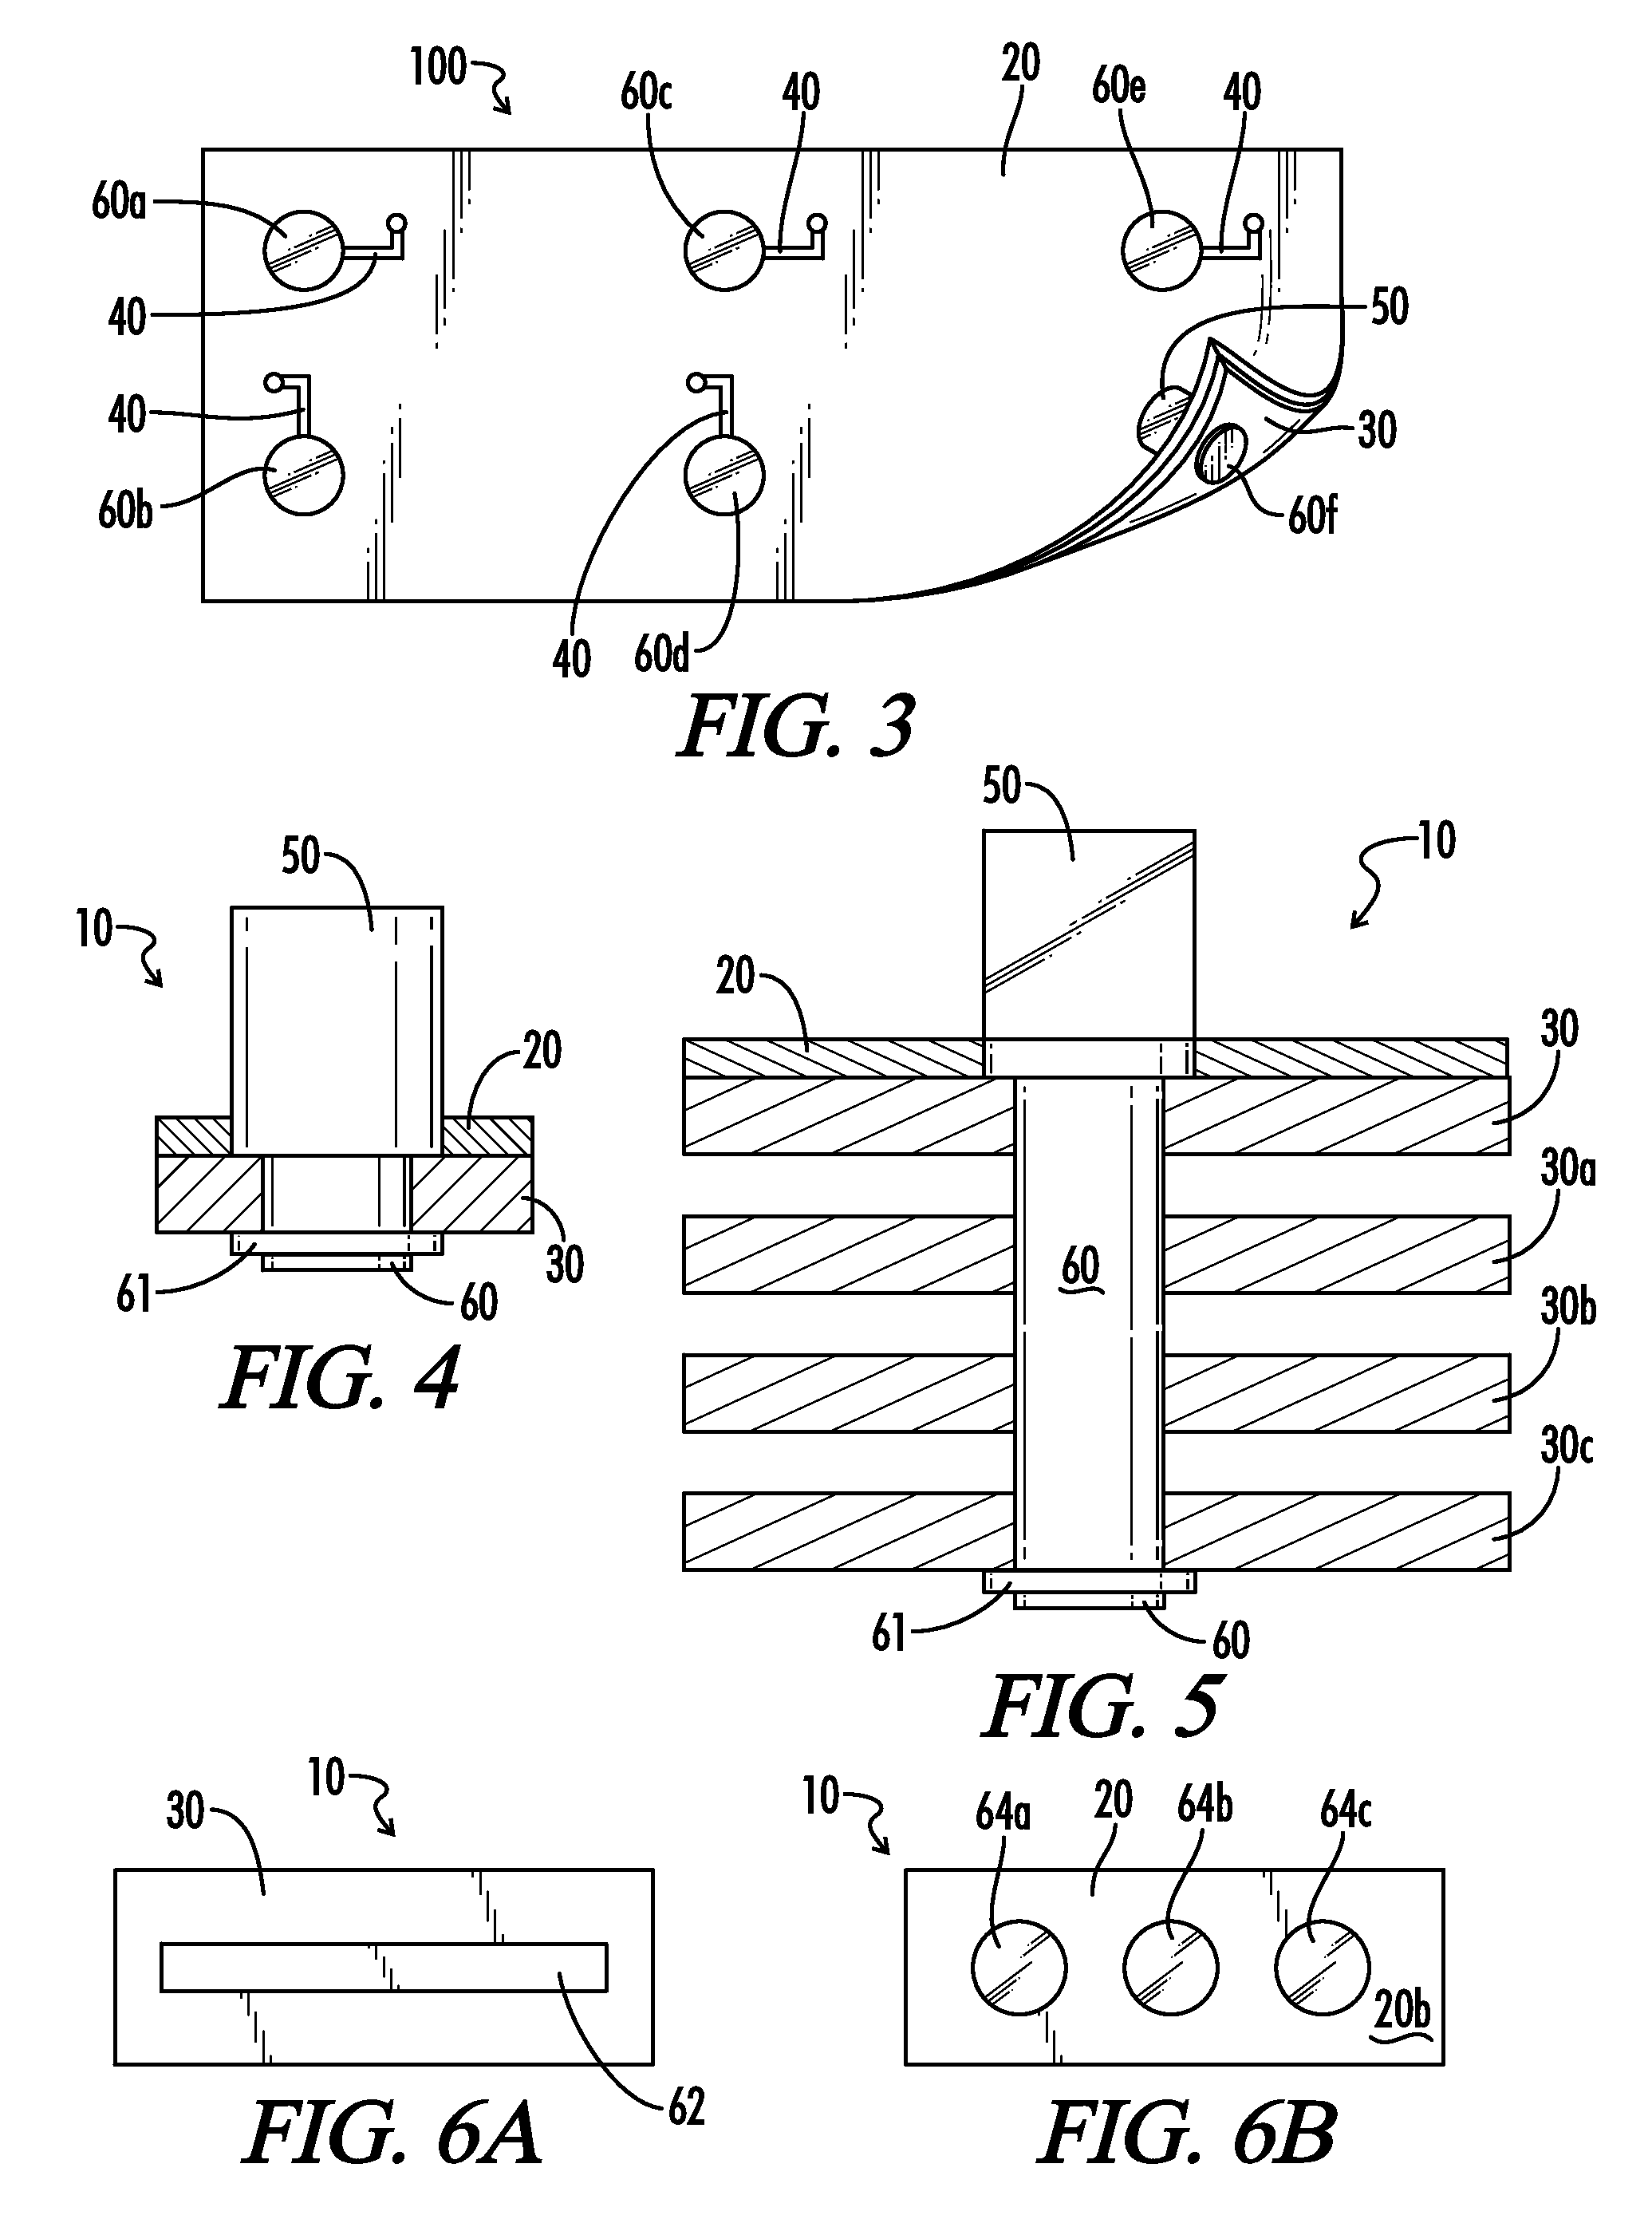 Heat spreading circuit assembly